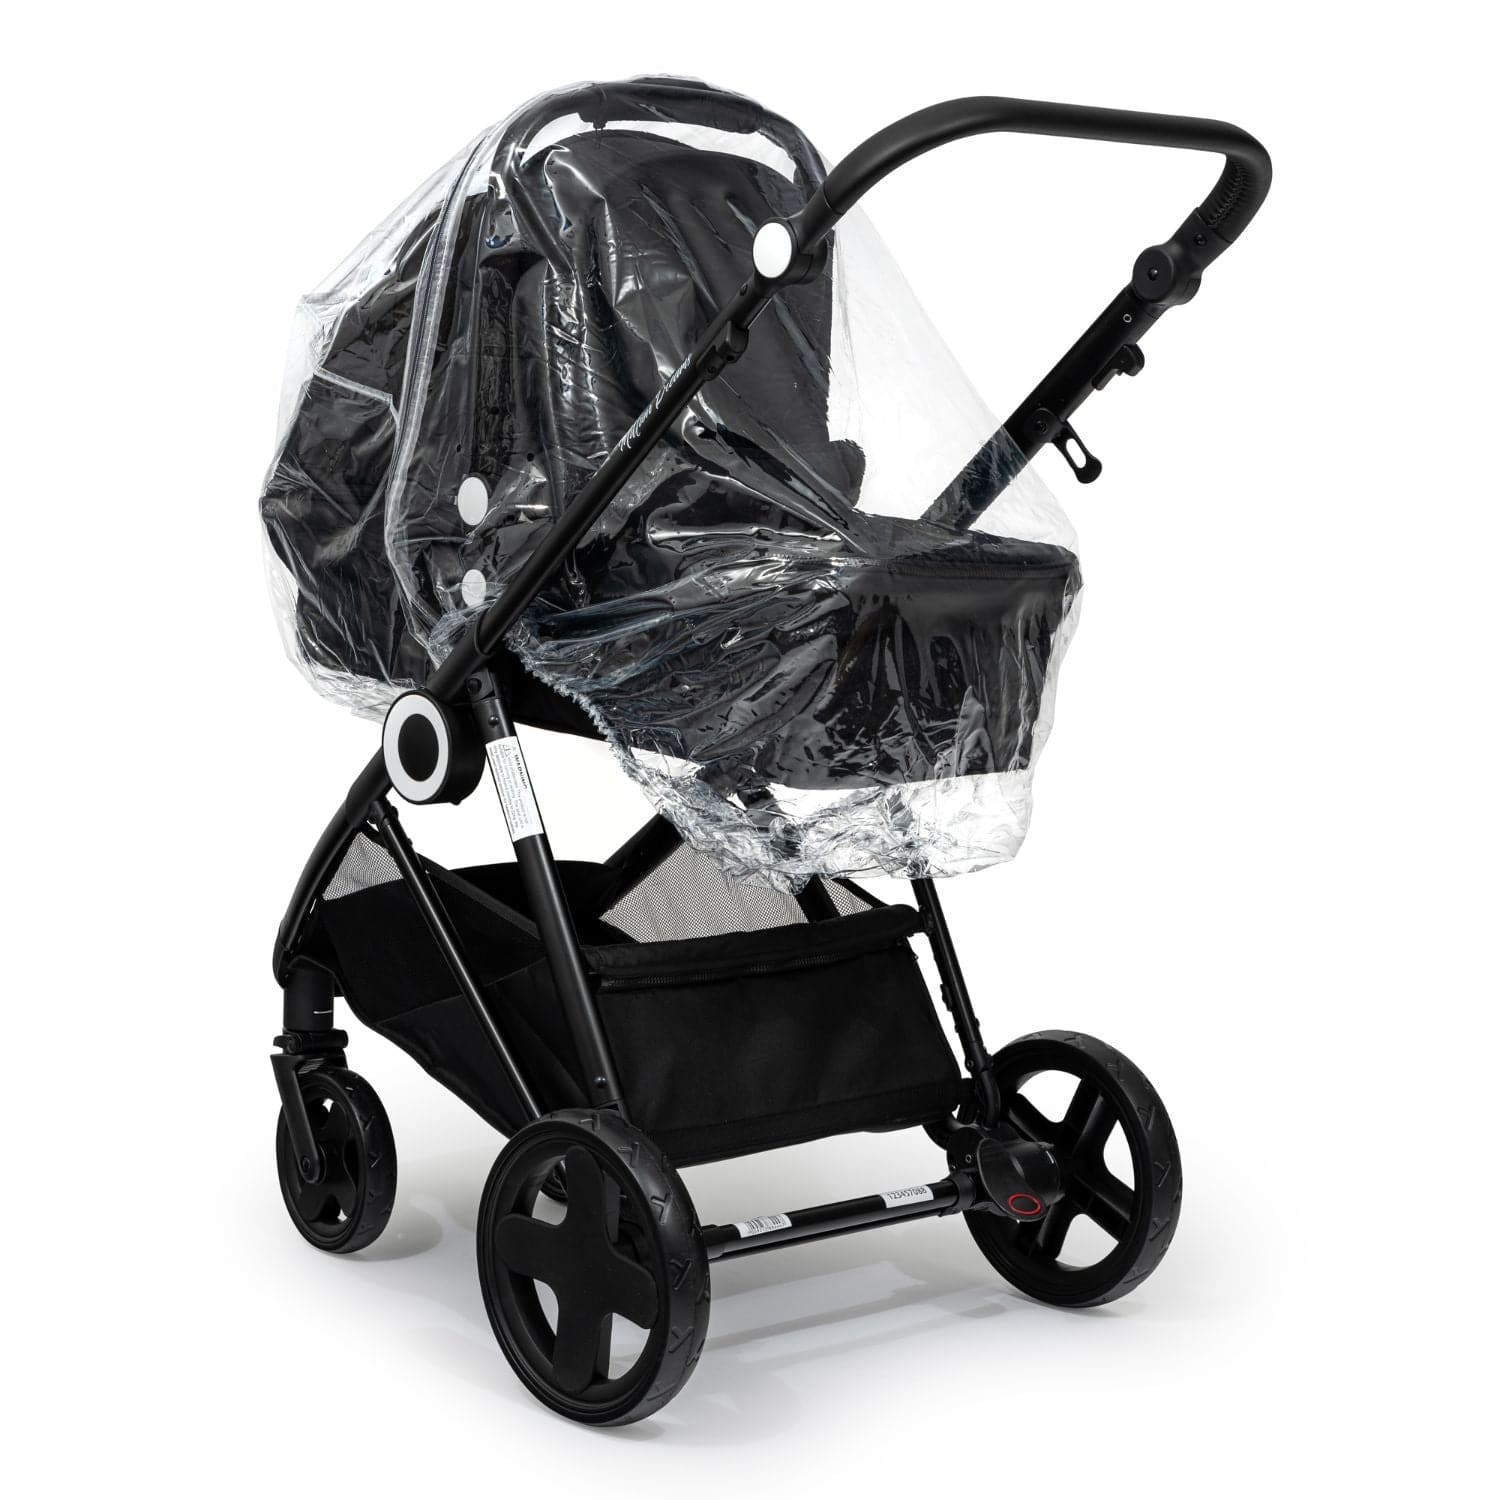 Carrycot Raincover Compatible With Baby Weavers - Fits All Models - For Your Little One